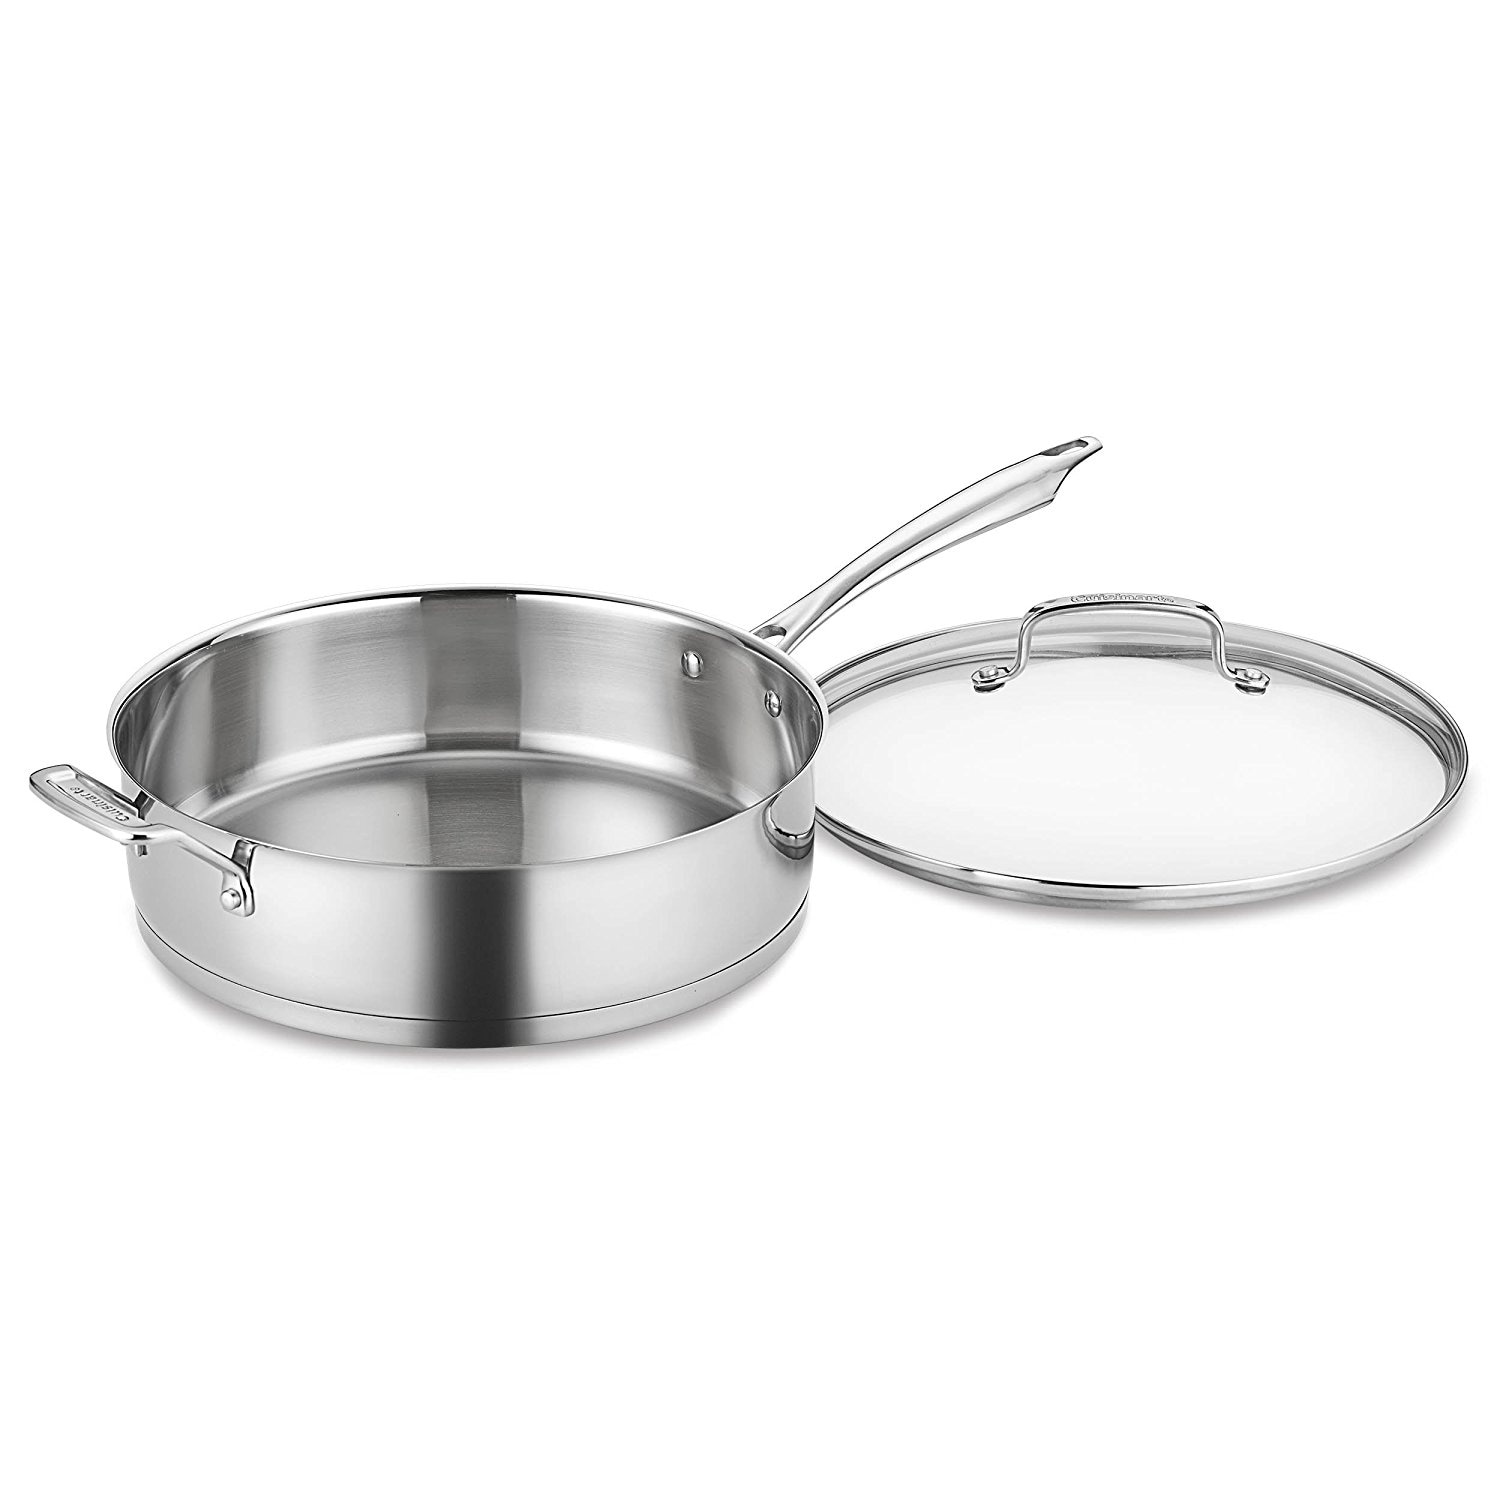 Cuisinart Casserole Dishes, Frying Pan Sale -  Deal of the Day June 17